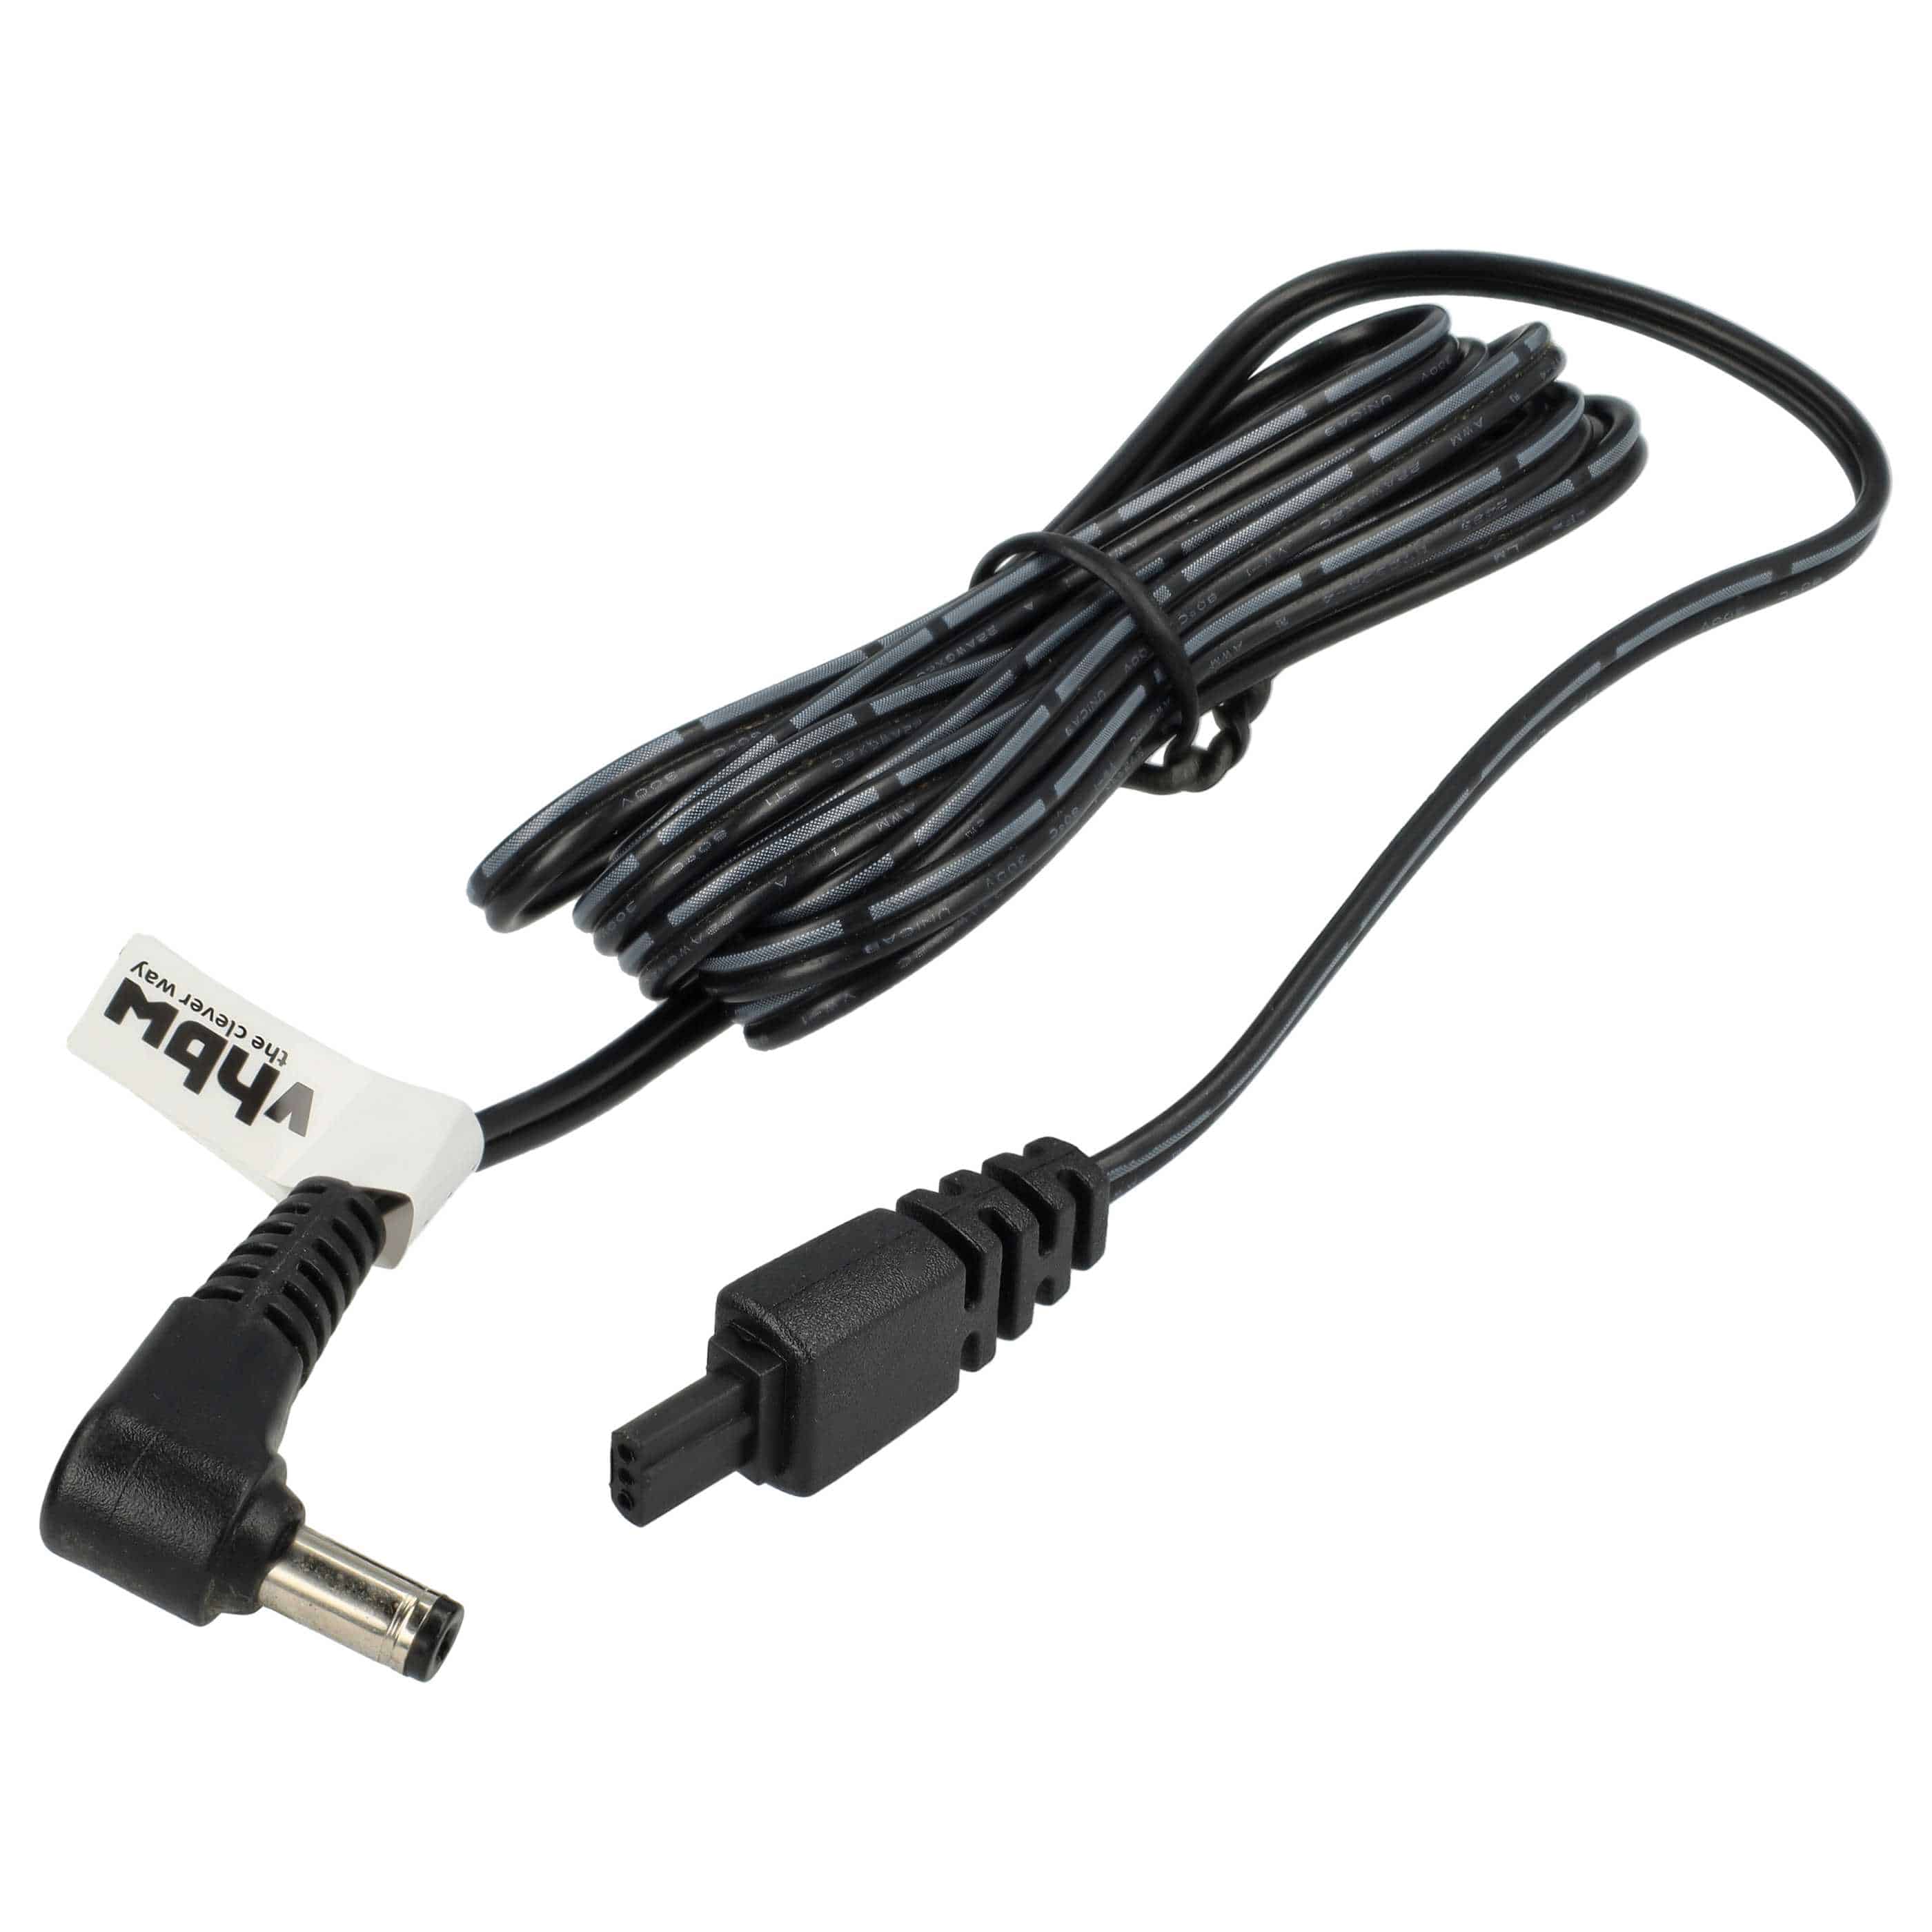 vhbw Power Cable Replacement for Panasonic K2GJYDC00004 for Camcorder, Camera - 100 cm, Black